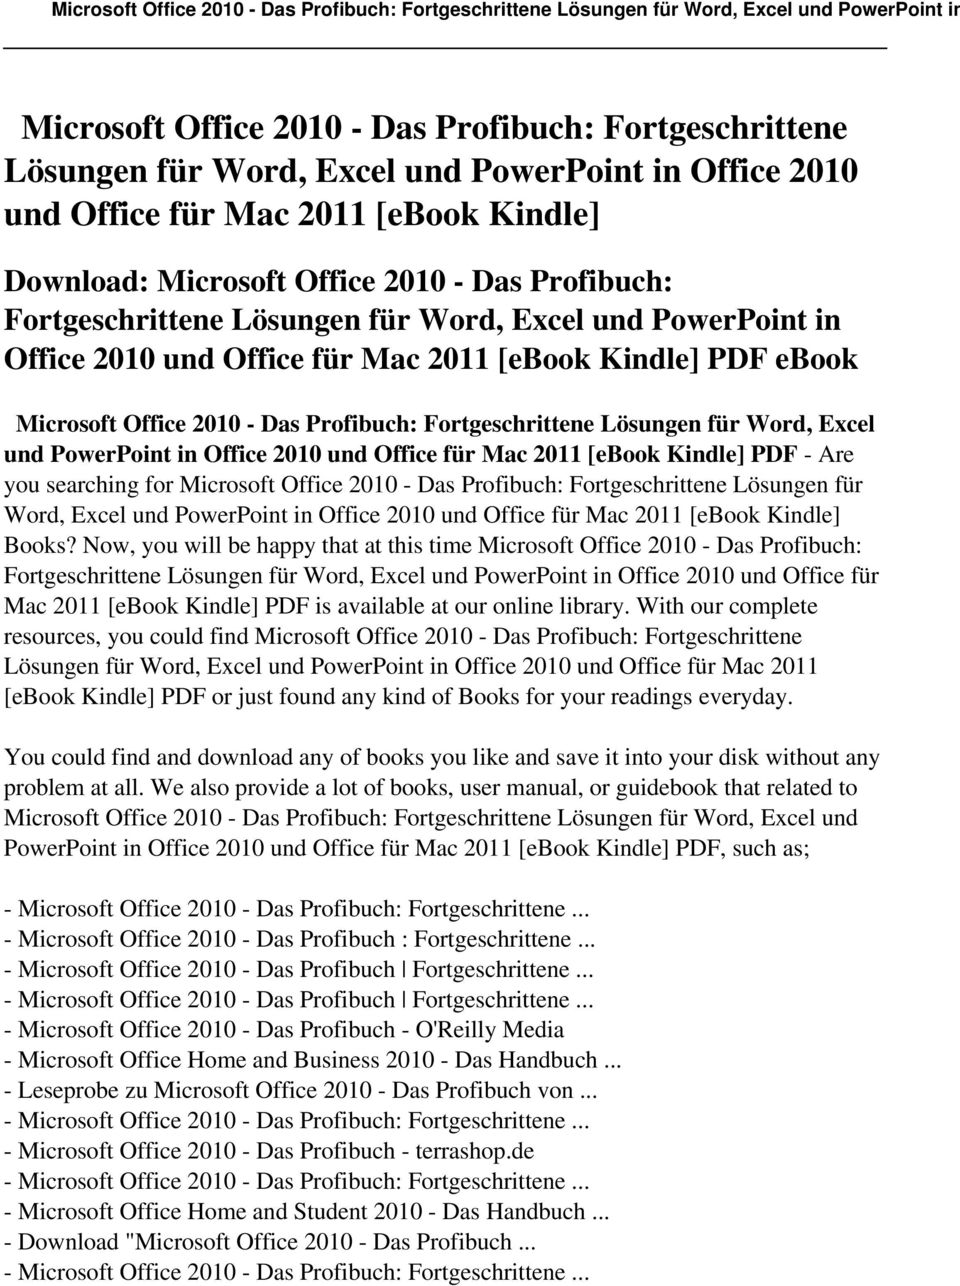 Excel und PowerPoint in Office 2010 und Office für Mac 2011 [ebook Kindle] PDF - Are you searching for Microsoft Office 2010 - Das Profibuch: Fortgeschrittene Lösungen für Word, Excel und PowerPoint